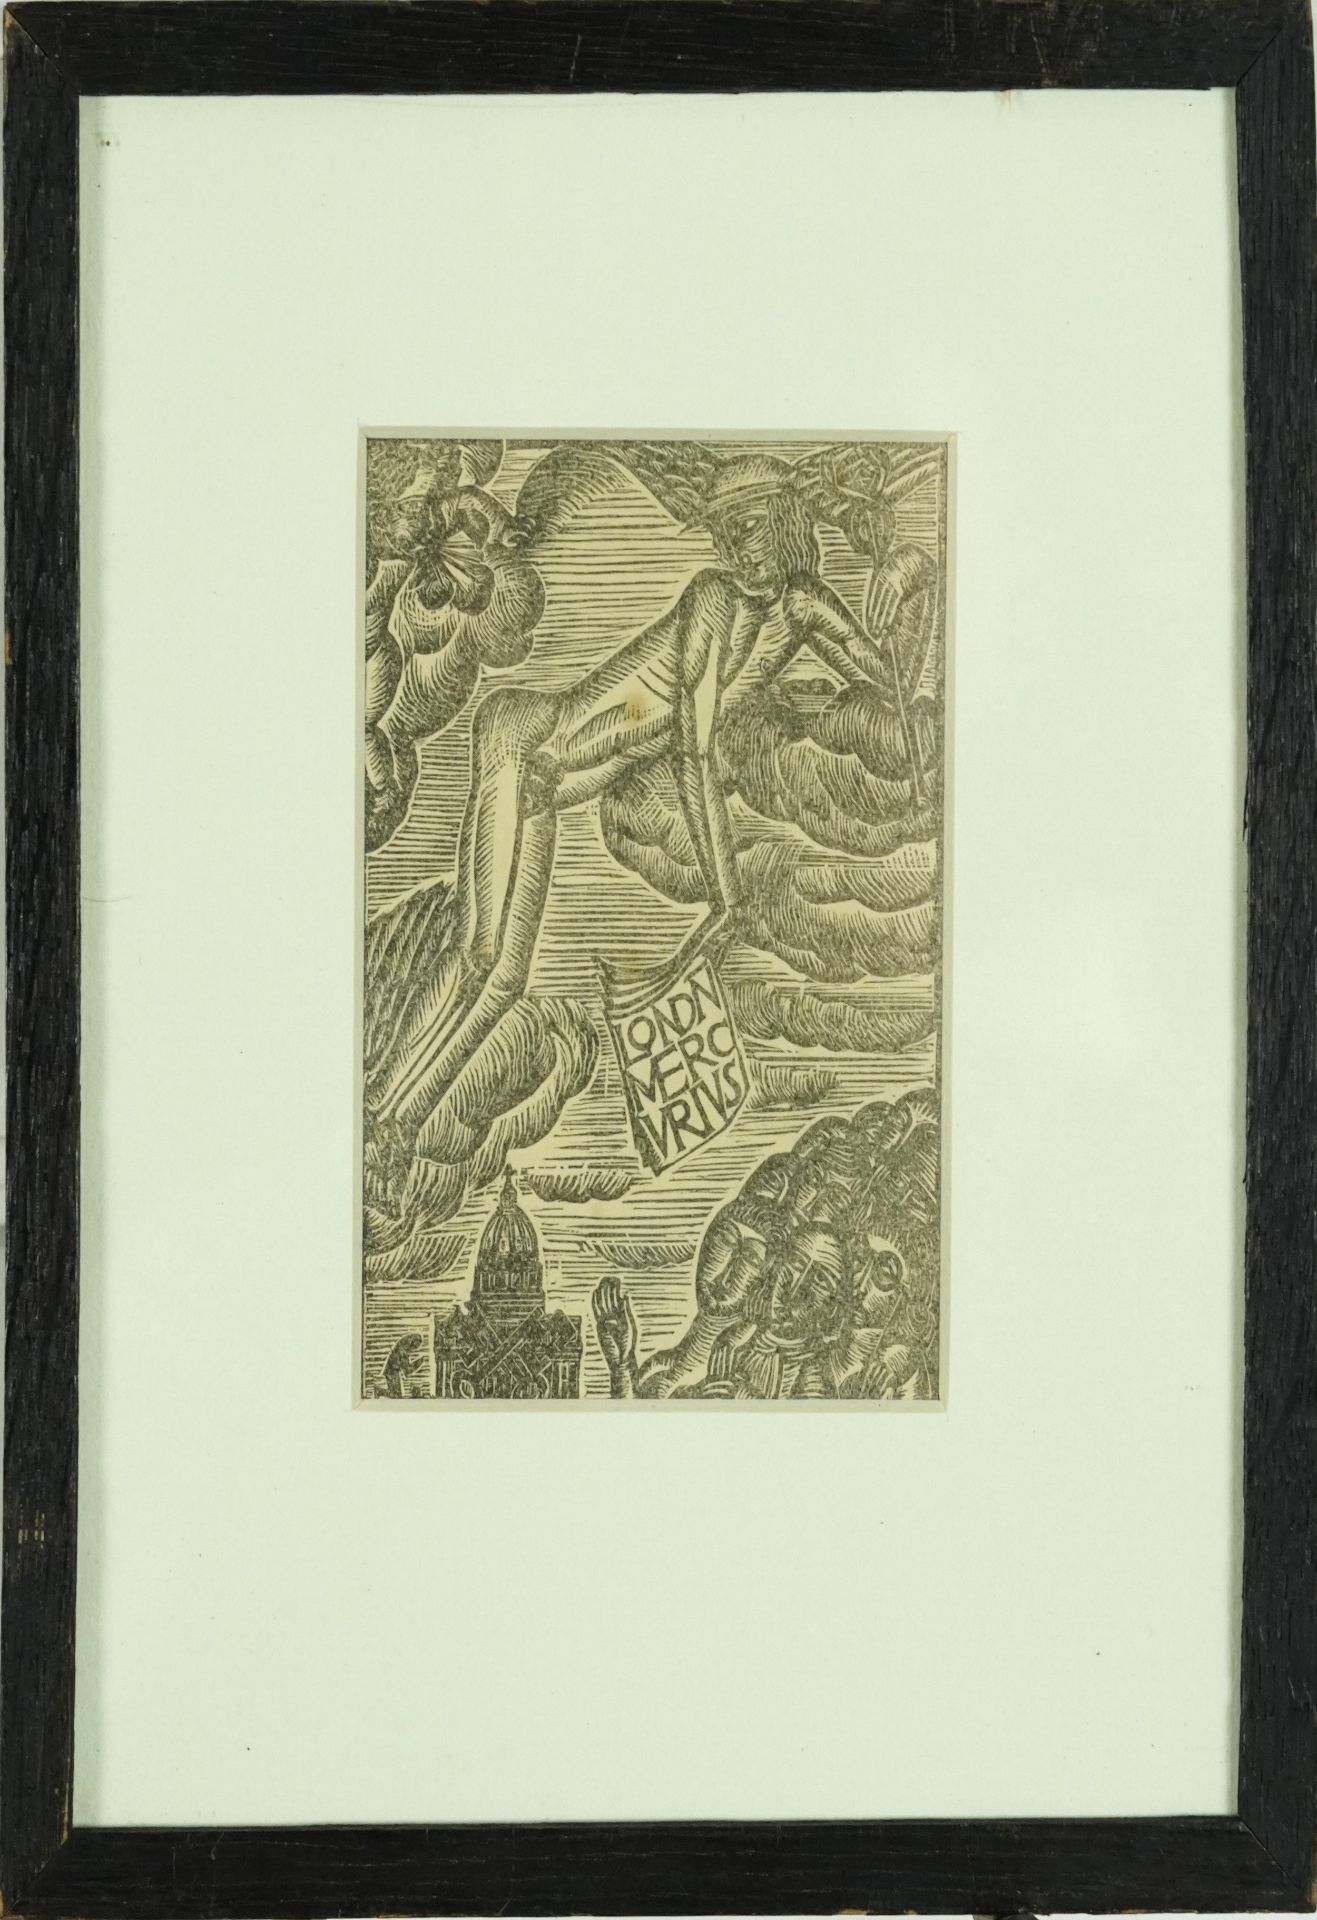 David Jones - Libellous Lapidum, two wood engravings, each inscribed St Dominic's Press Ditchling - Image 7 of 9